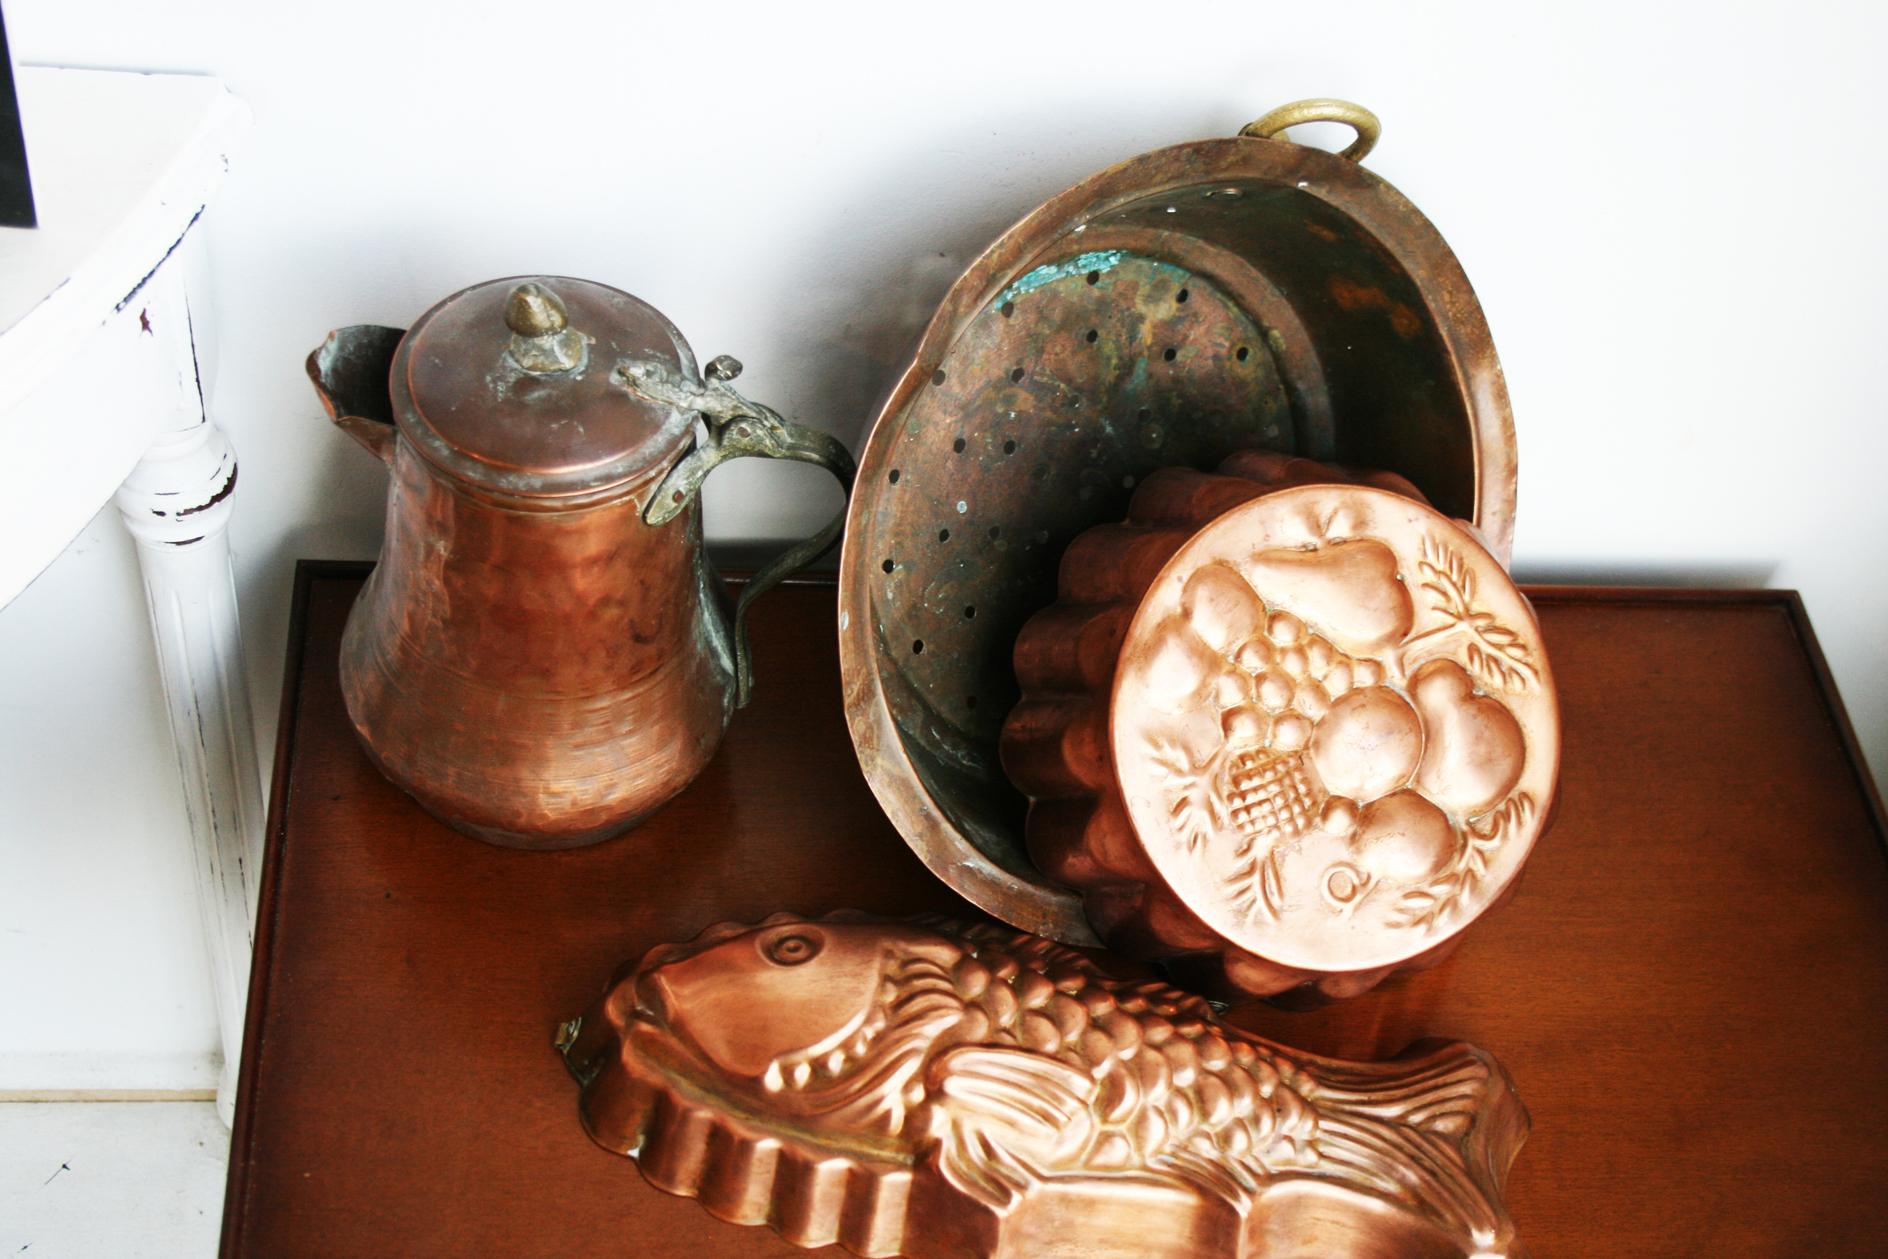 Lot old copper molds and utensils to decorate your rustic style kitchen

Lot of 4 pierces. Two molds, a strainer and a coffee maker

copper kitchen ornaments, kitchen style, French
beautiful kitchen utensils, vintage decoration
kitchen vintage